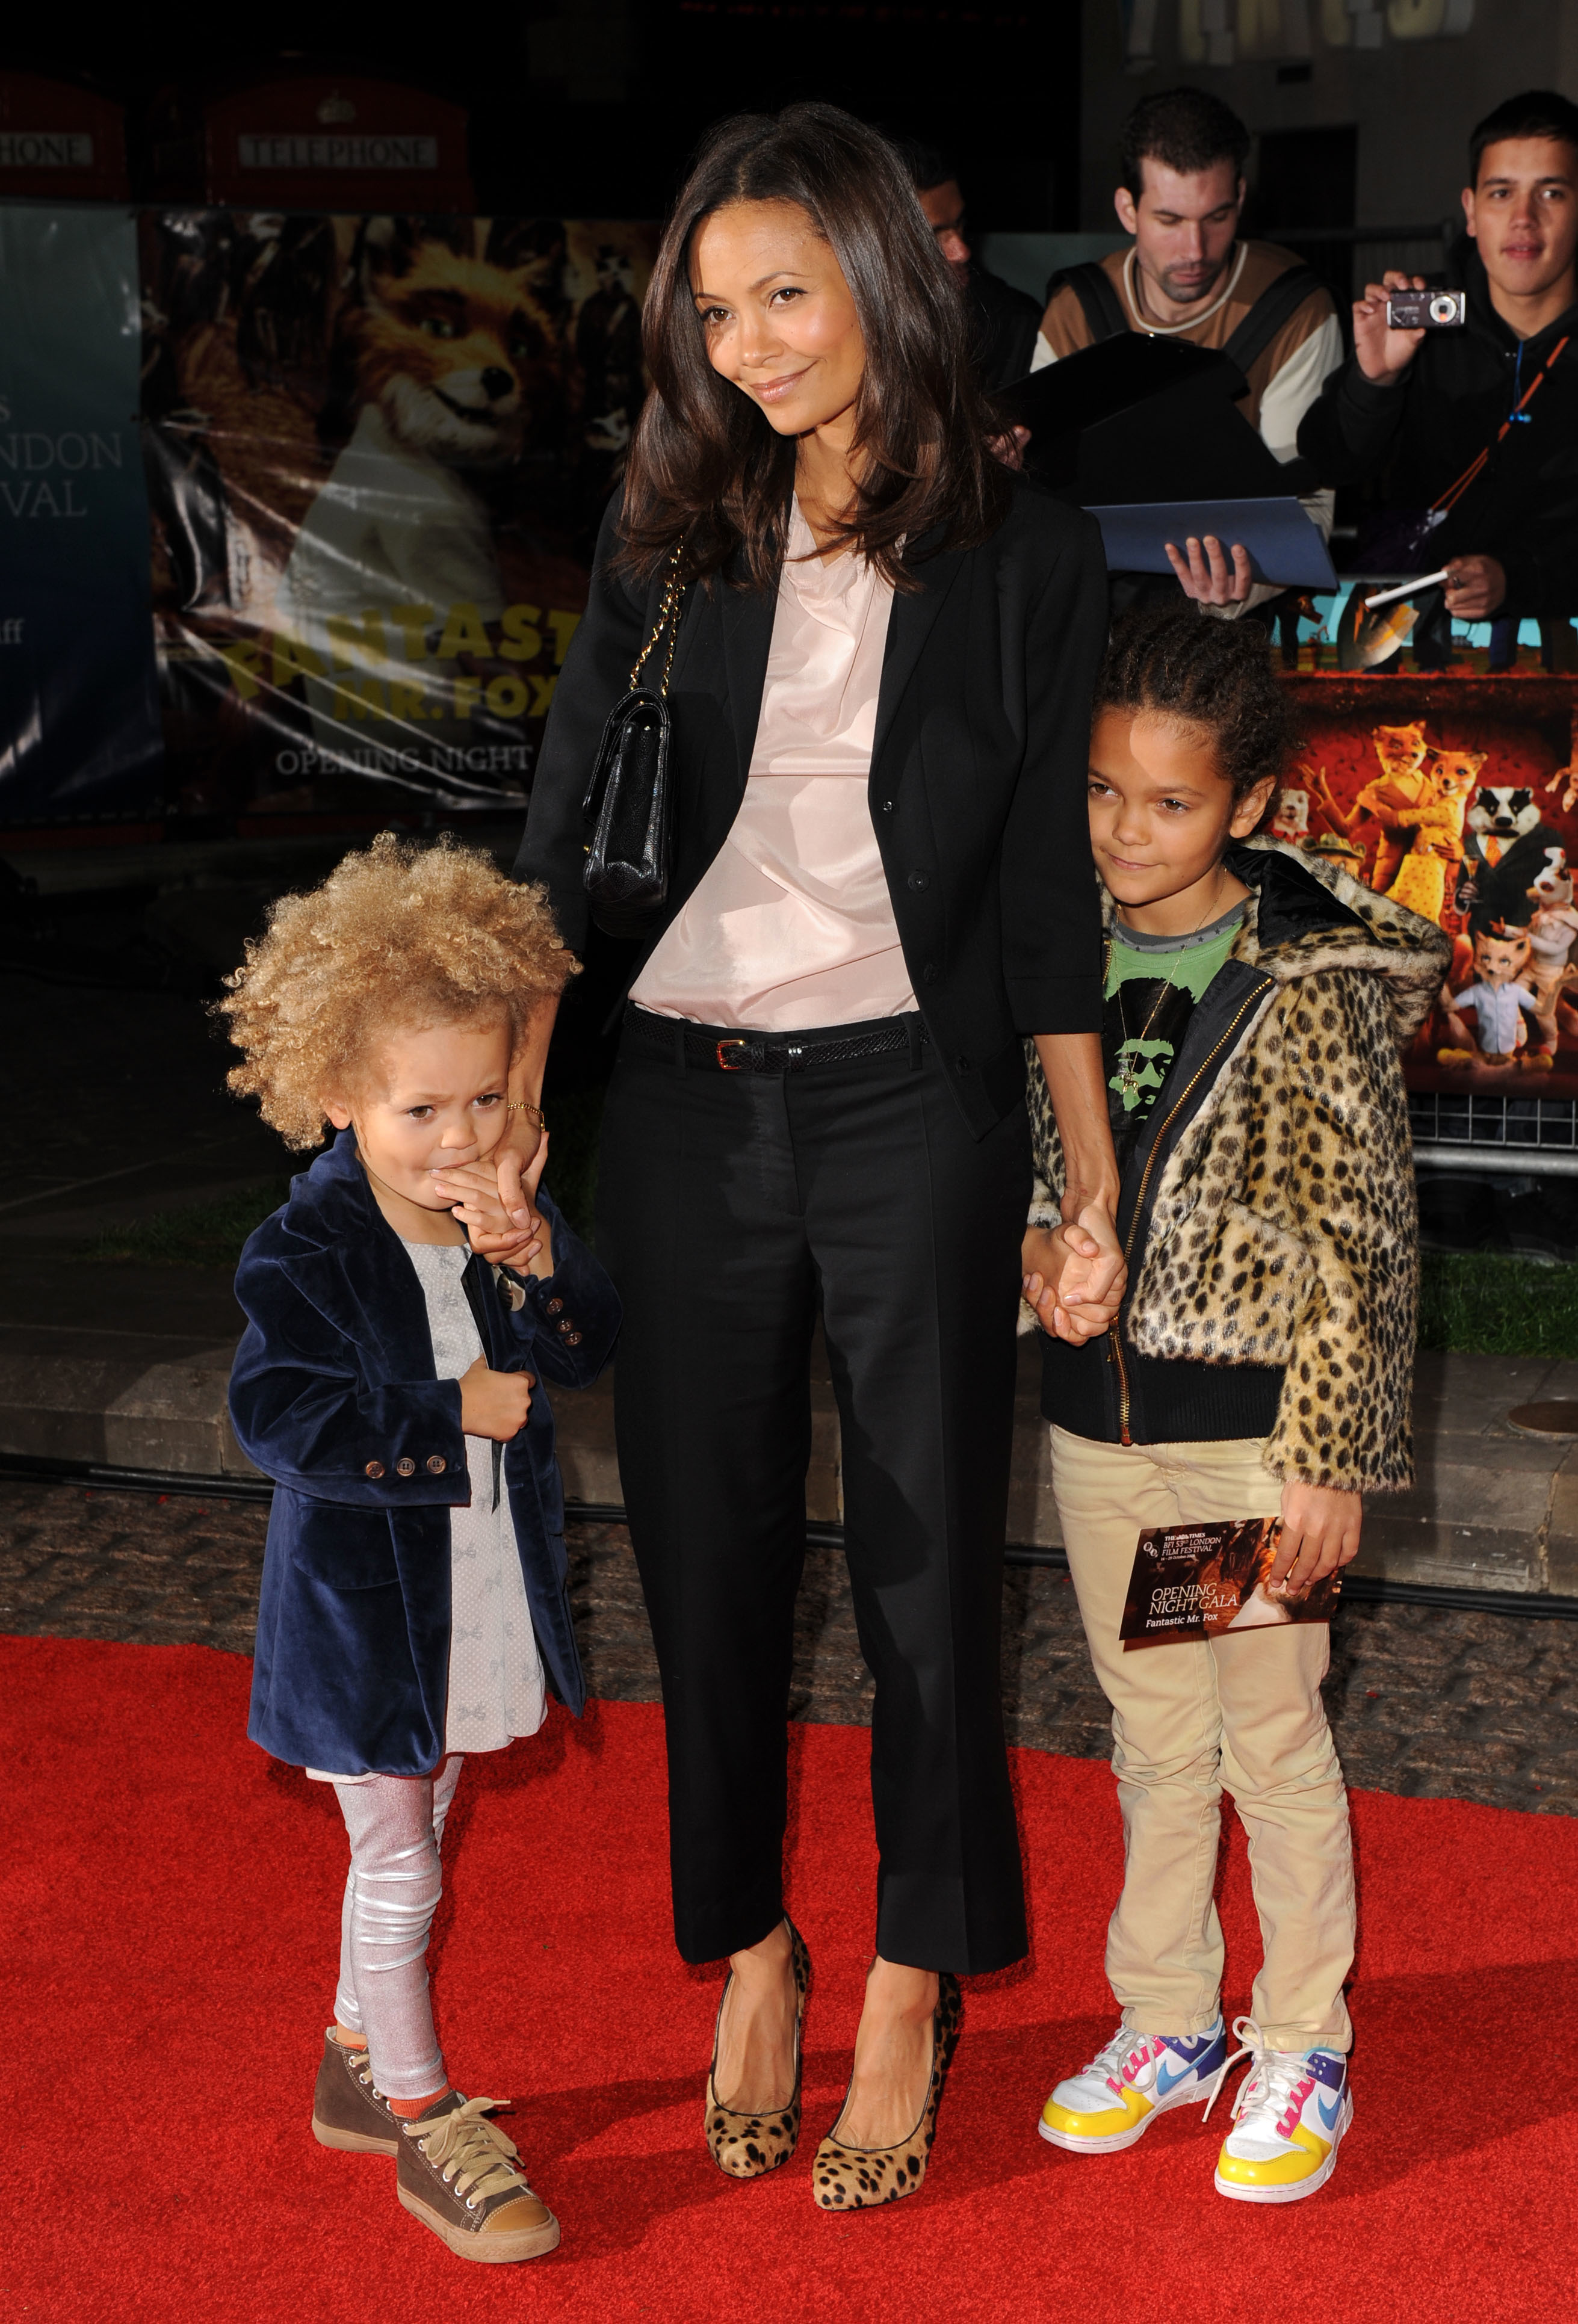 <p>Thandiwe Newton brought her little girls with screenwriter-director husband Ol Parker -- Nico Parker, then 4, and Ripley Parker, then 8 -- to see "Fantastic Mr. Fox" at the movie's BFI London Film Festival premiere on Oct. 14, 2009. See them all grown up next...</p>